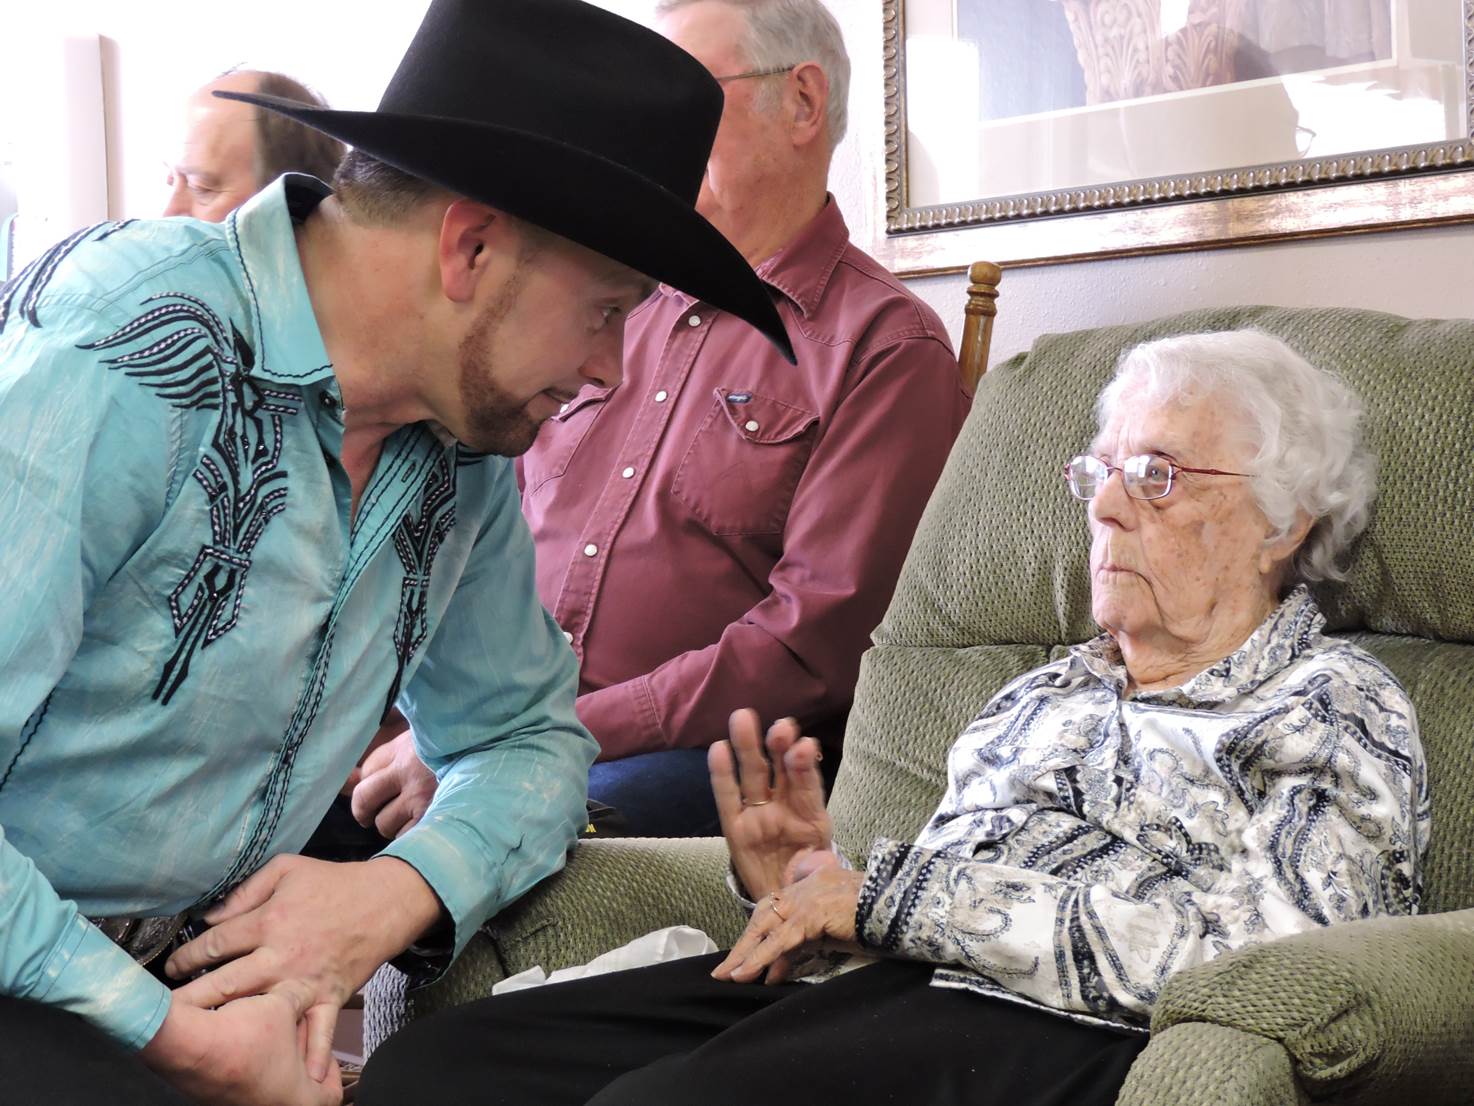 country singer performs for hospice patient